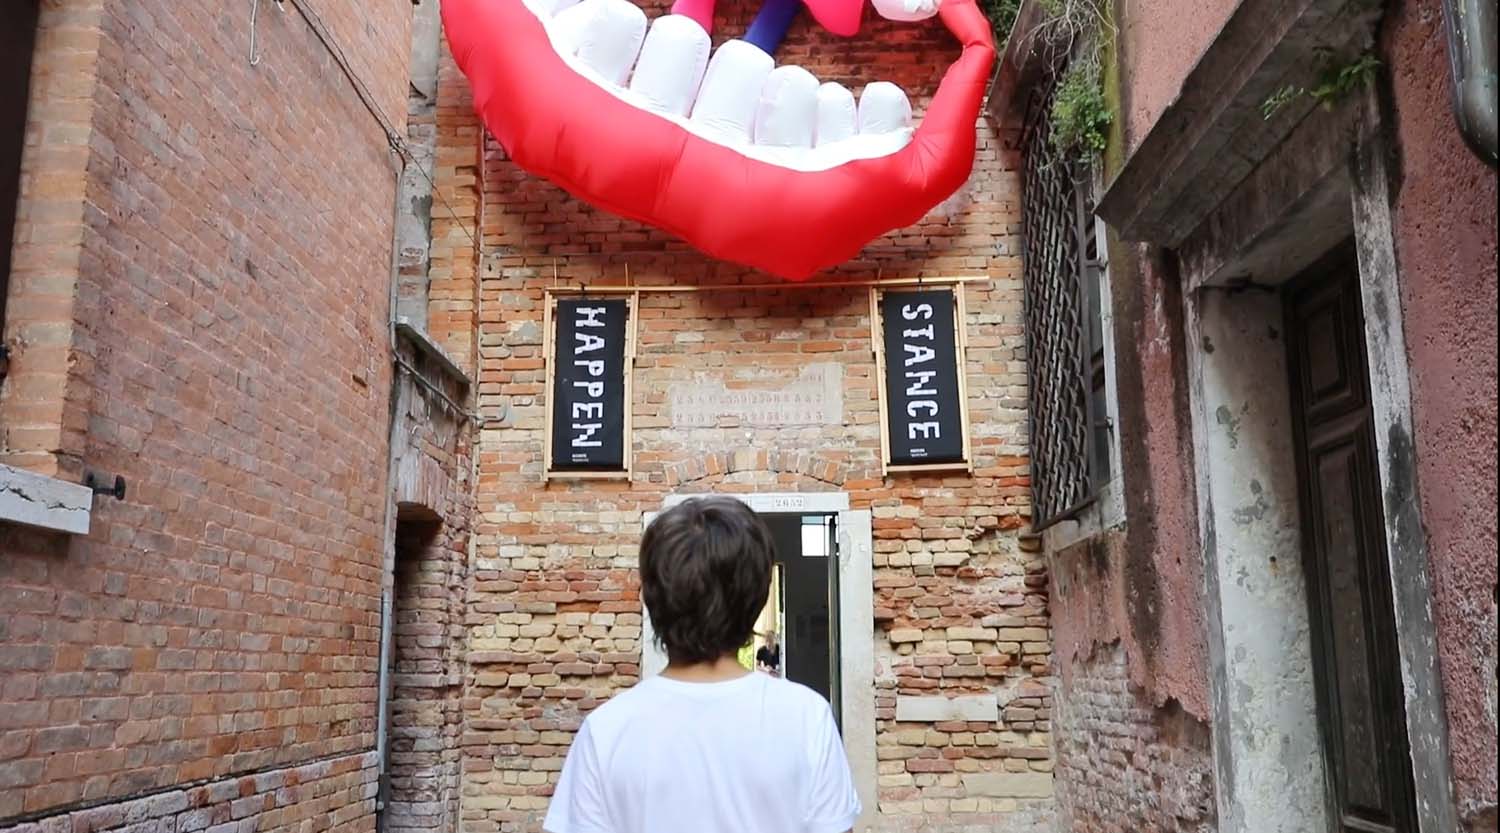 A child wearing a white t-shirt stands in a narrow streets surrounded by brick buildings looking up at a large inflatable red mouth and two black deck chairs with the words Happen and Stance 